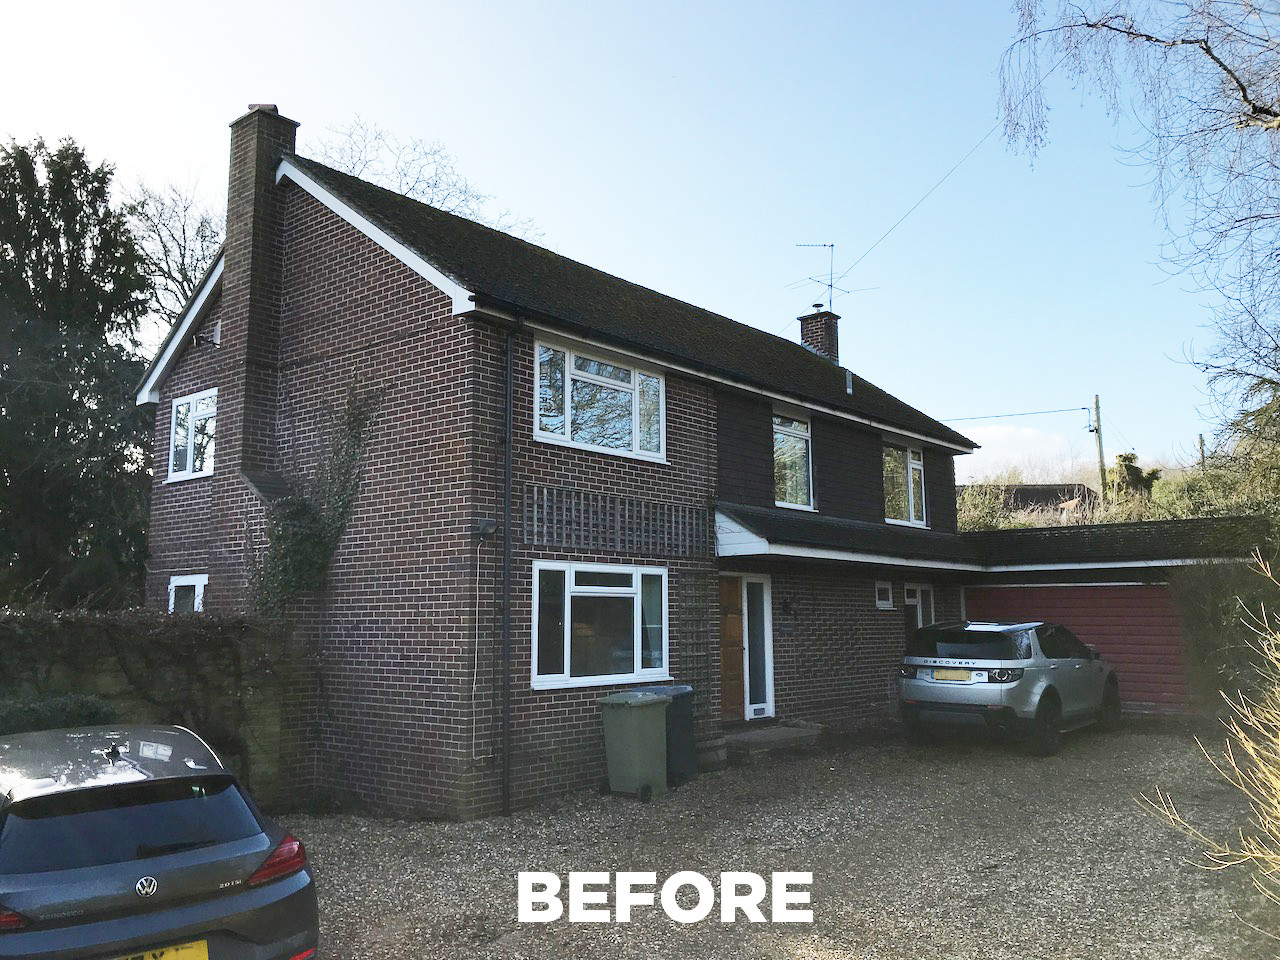 1970's DETACHED HOUSE EXTENSIONS, REMODEL, RENOVATION, MAKEOVER